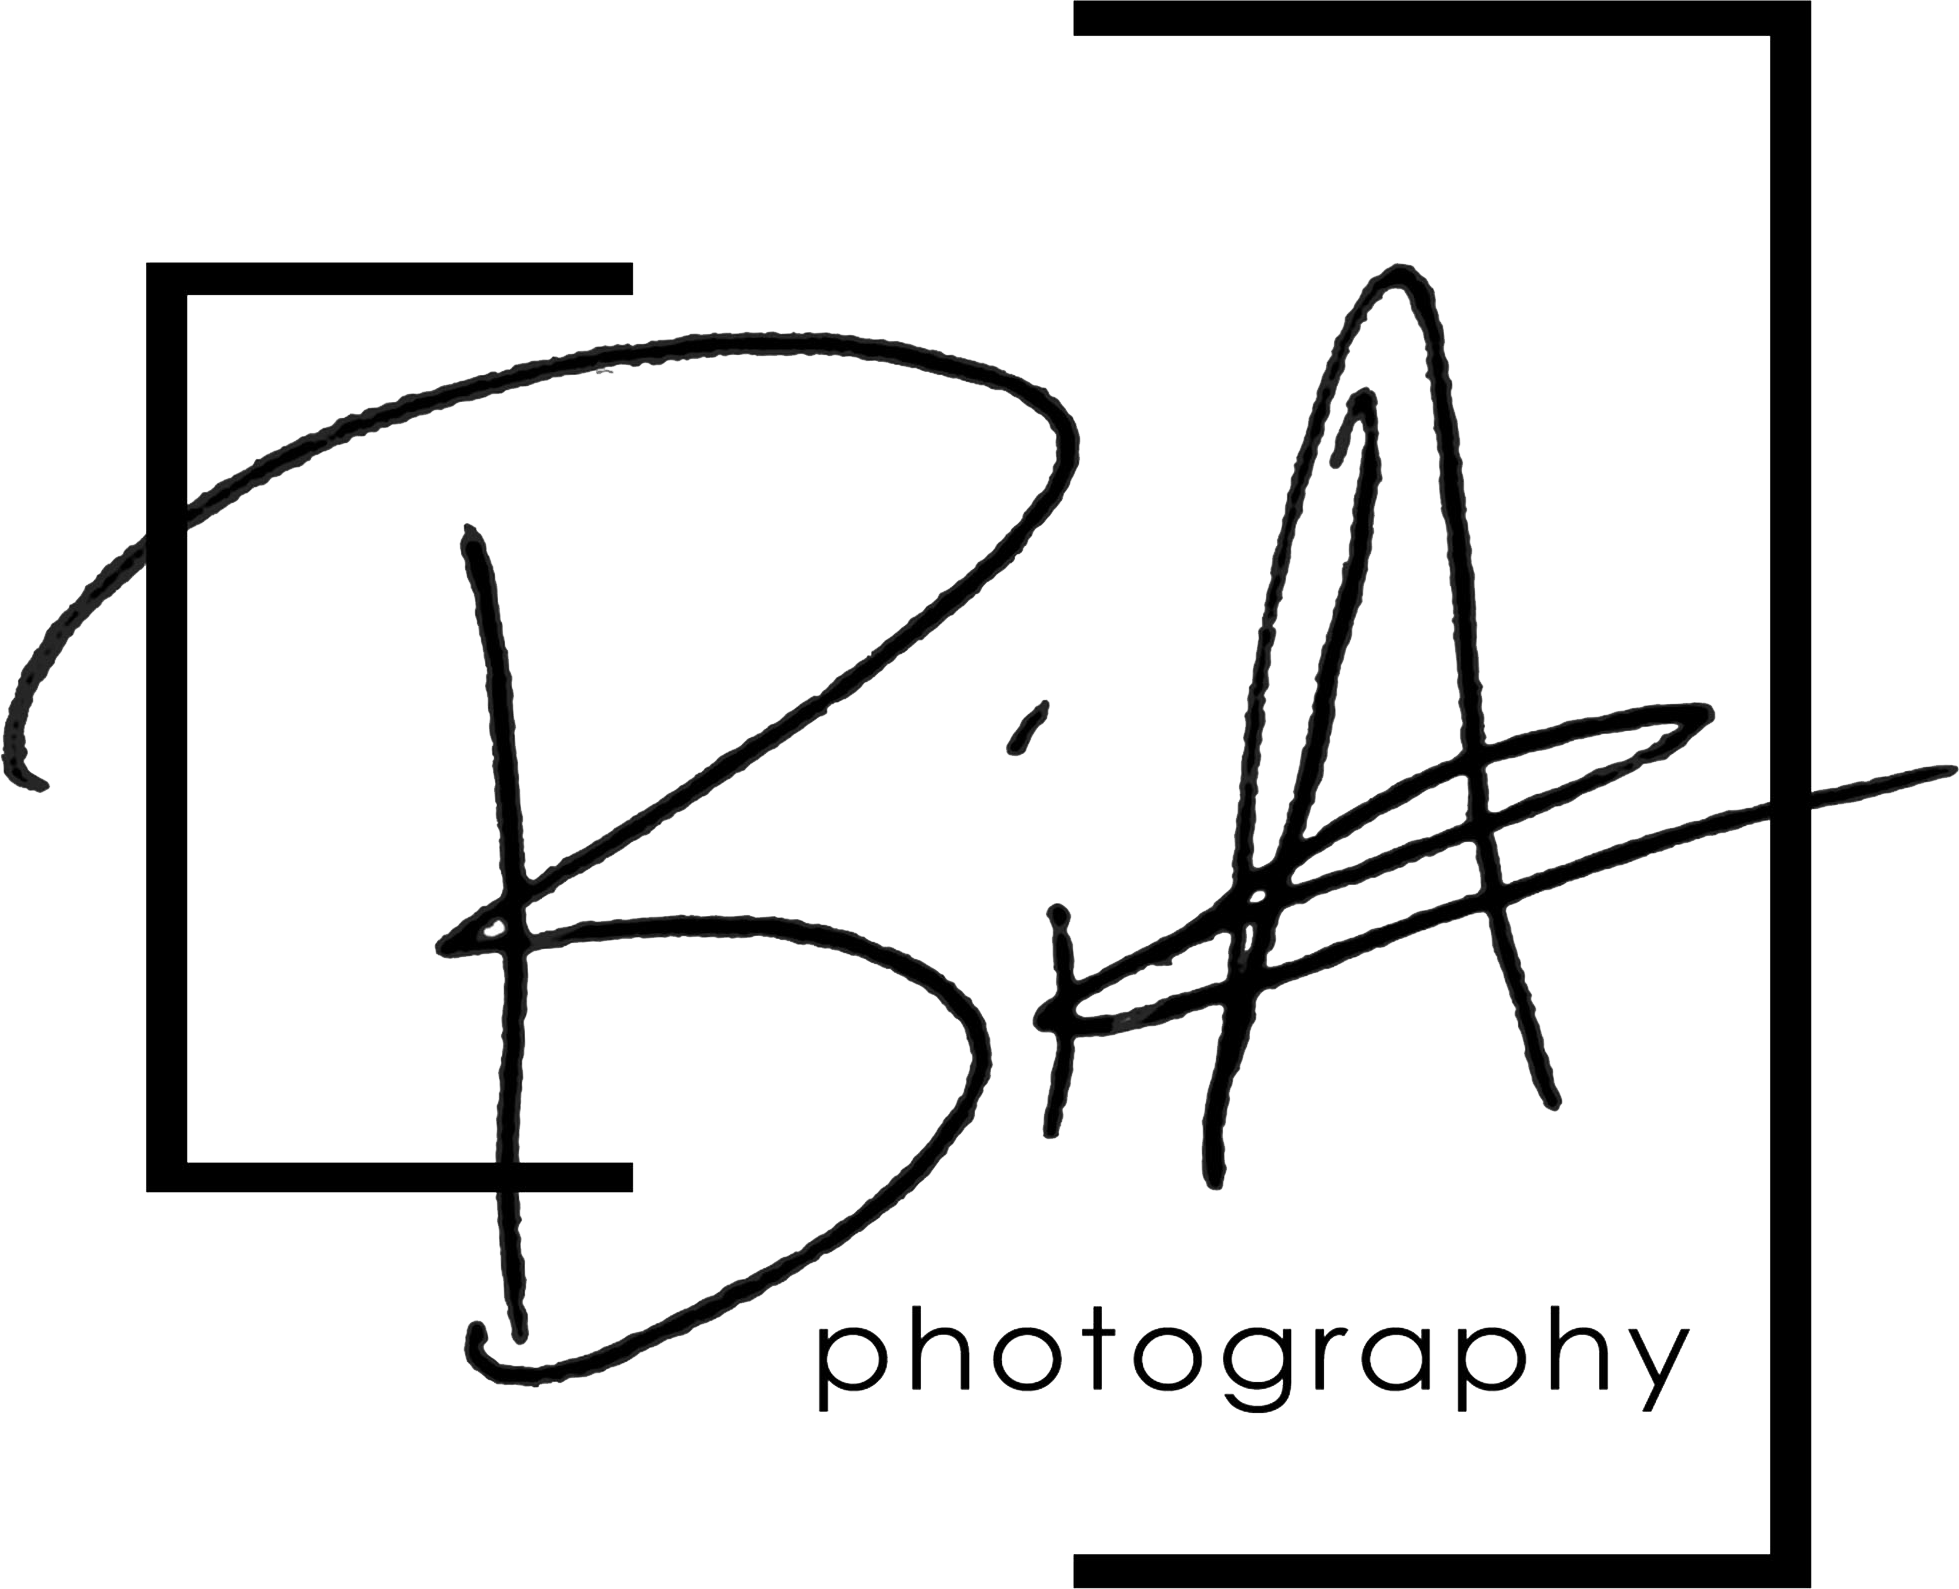 BiA Photography